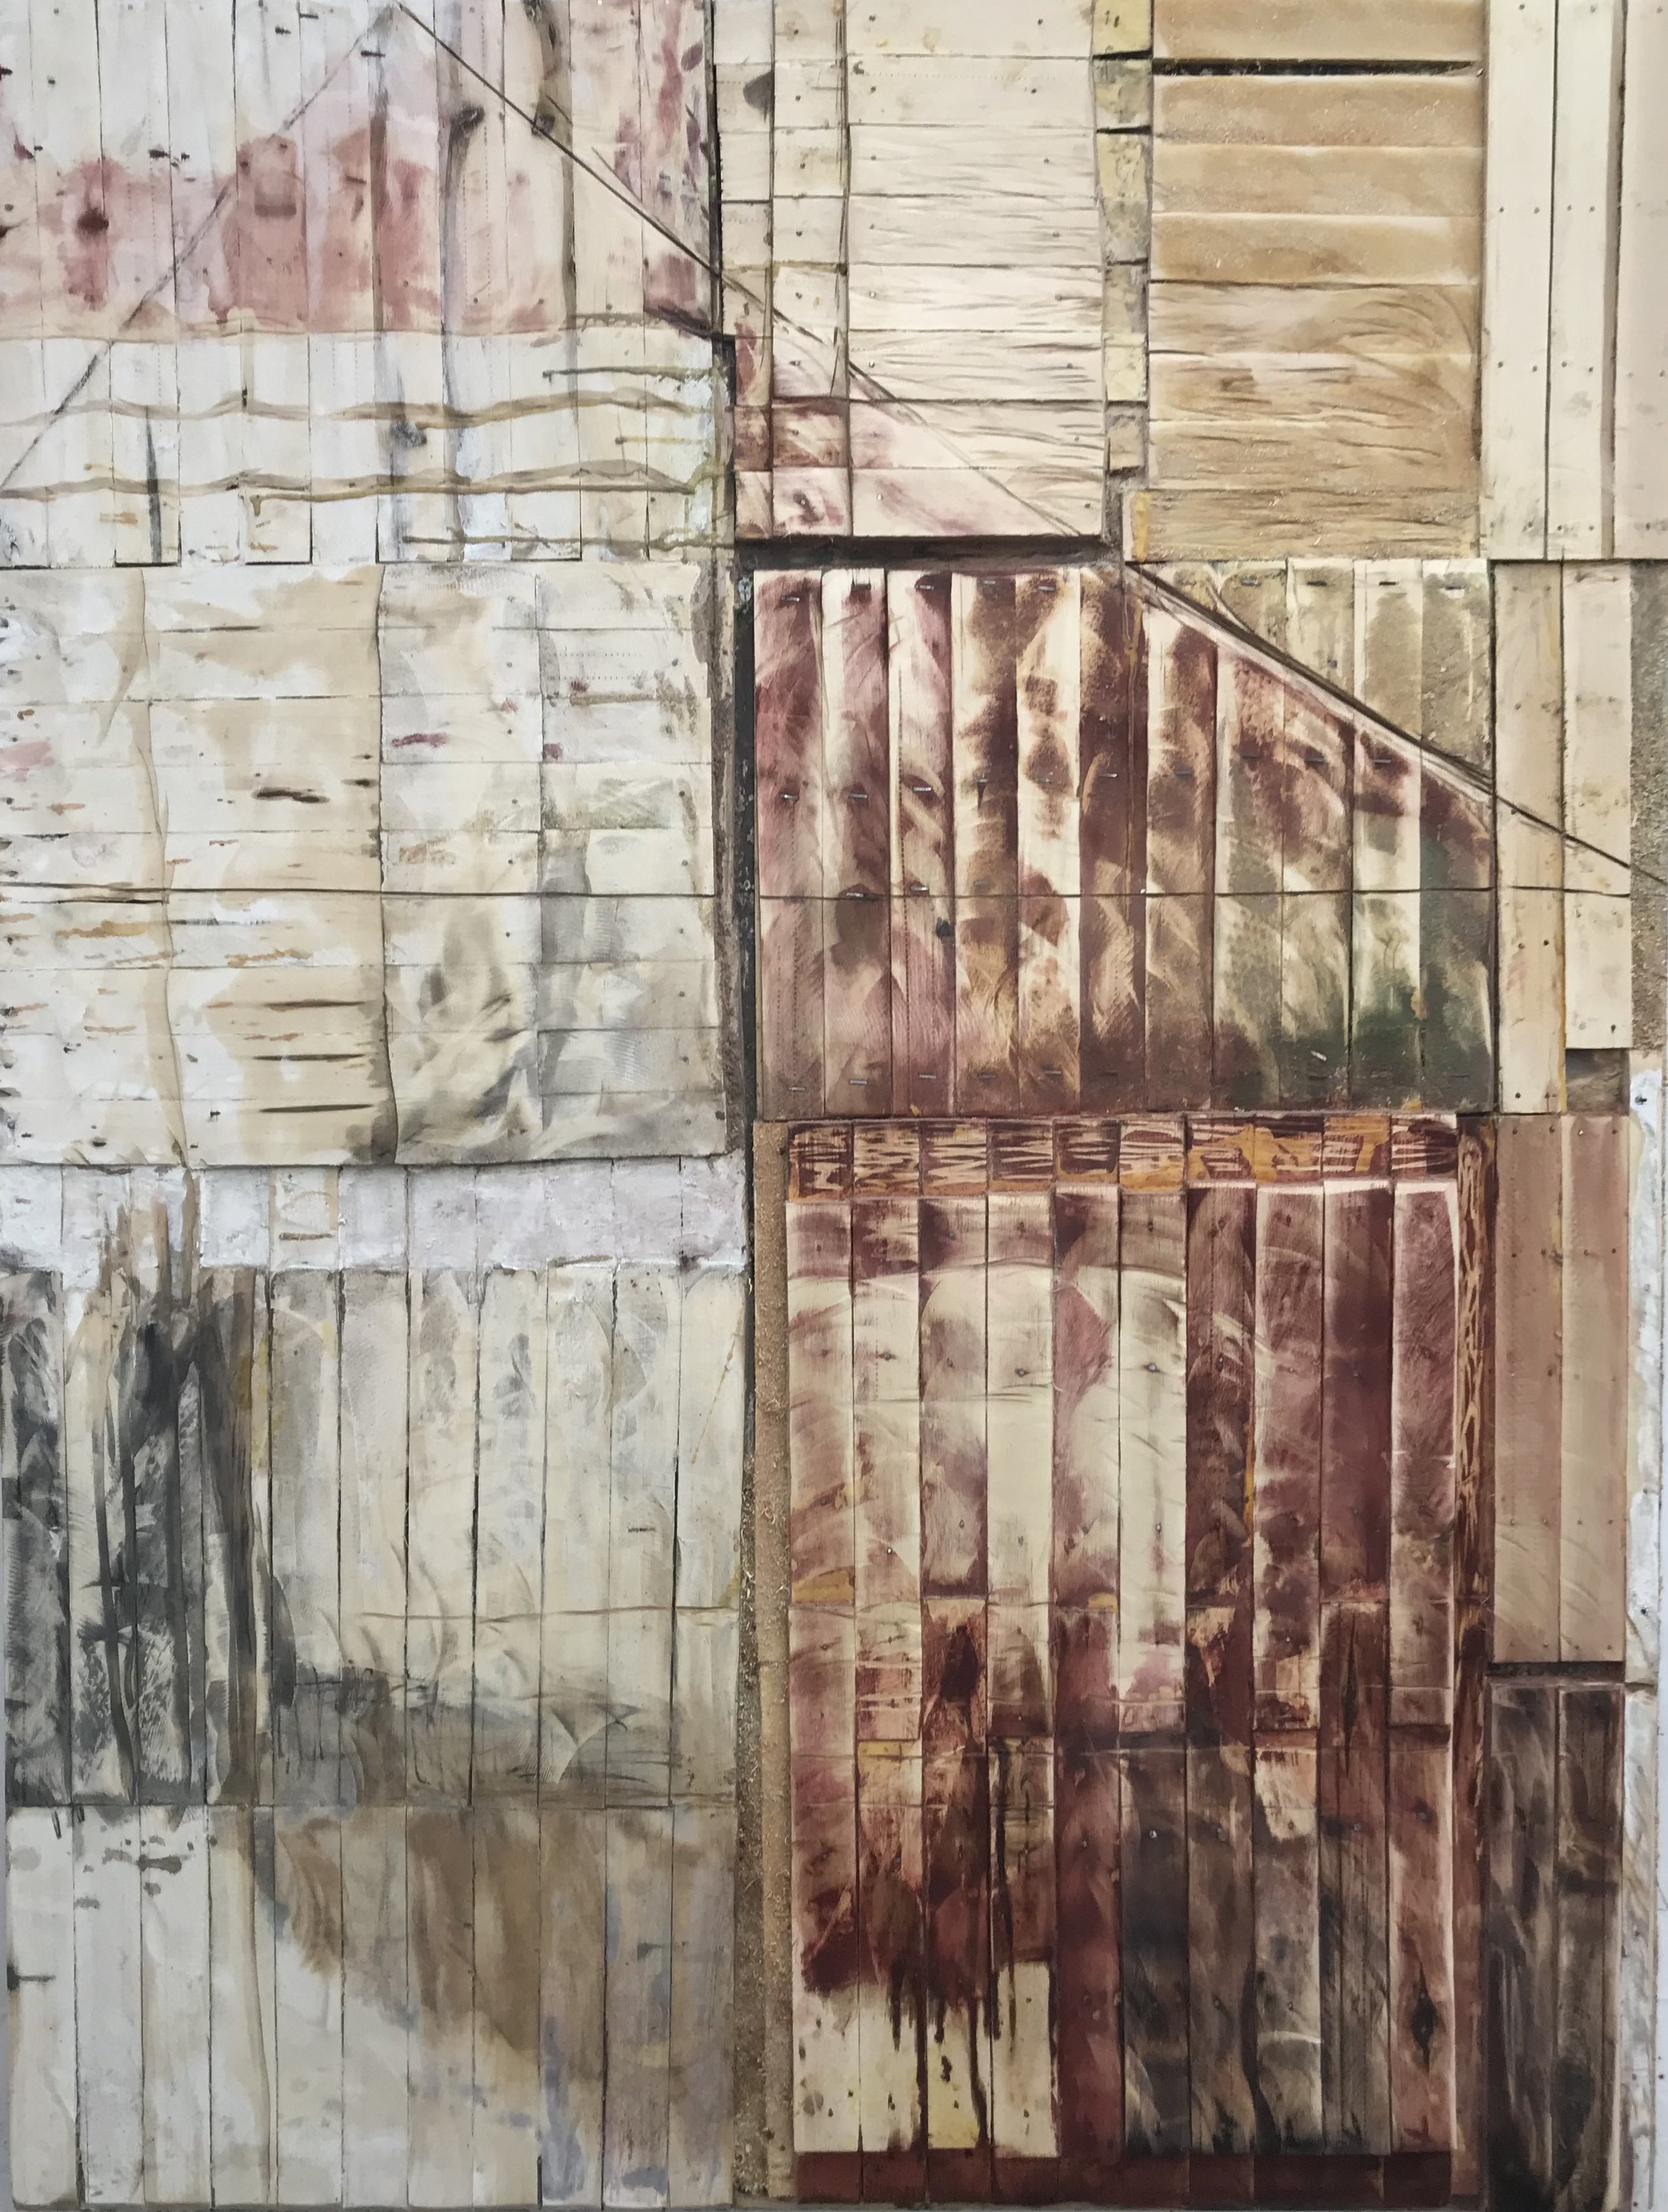  Leslie Zelamsky,  “Dwelling Revisited”   Shims and patina on panel, 48 x 36 inches 